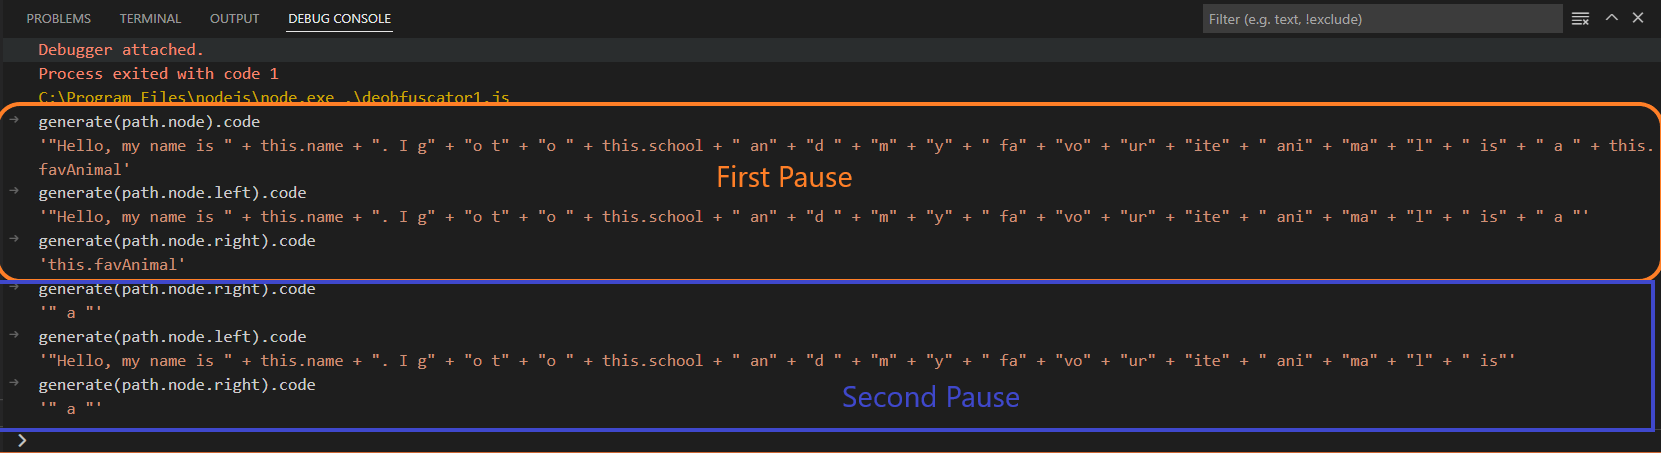 The first and second pause